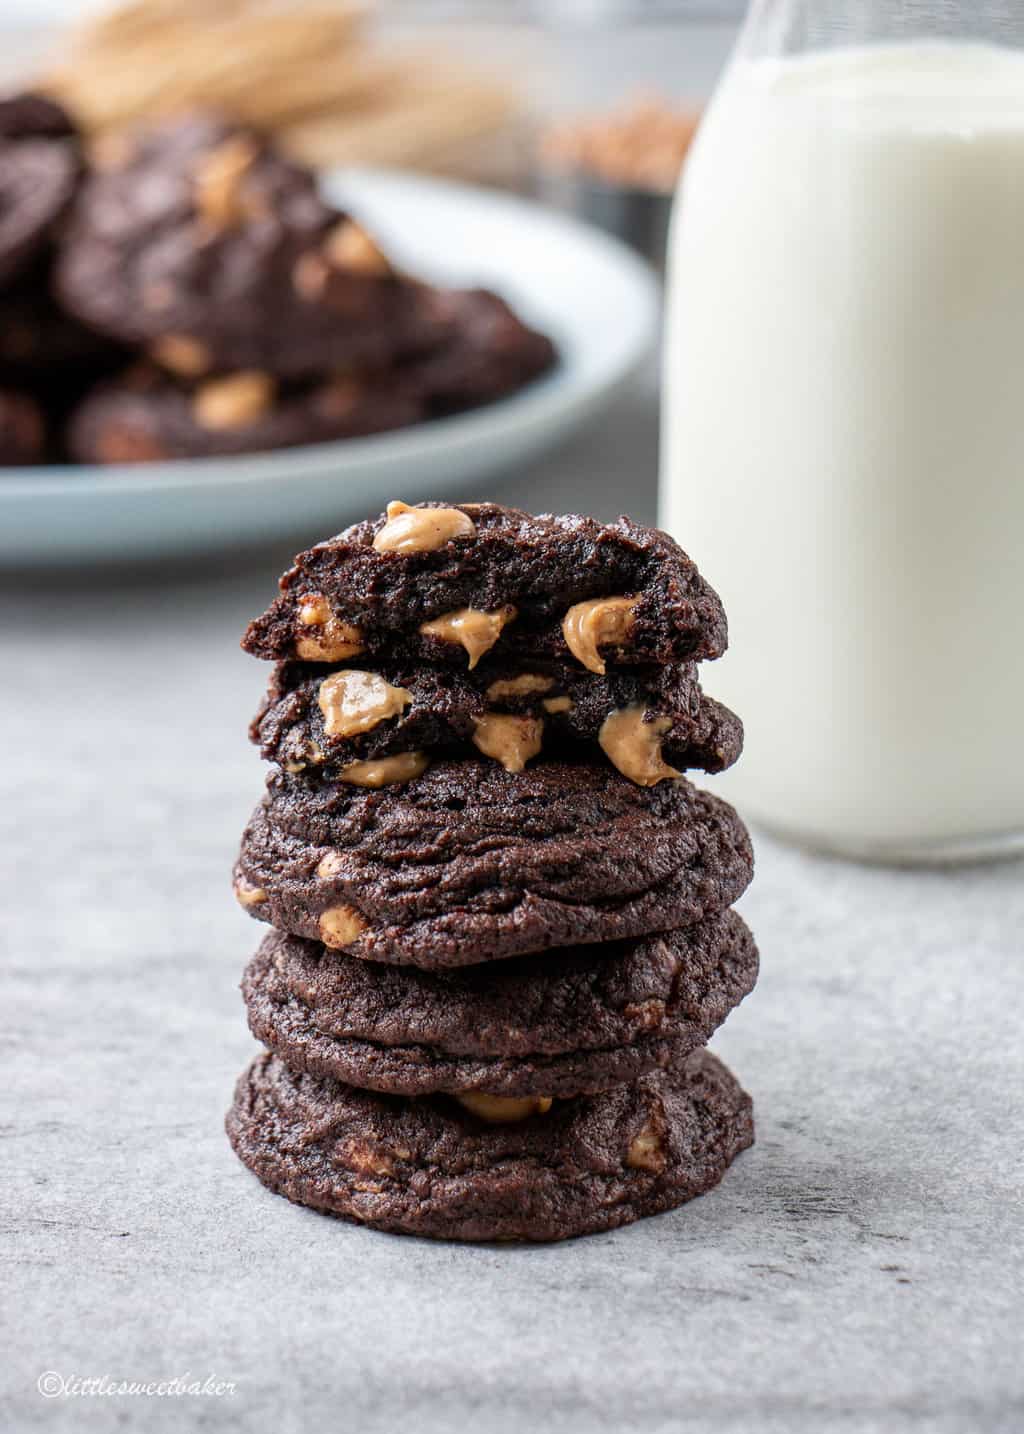 A stack of chocolate peanut butter chip cookies with a glass of milk in the background.